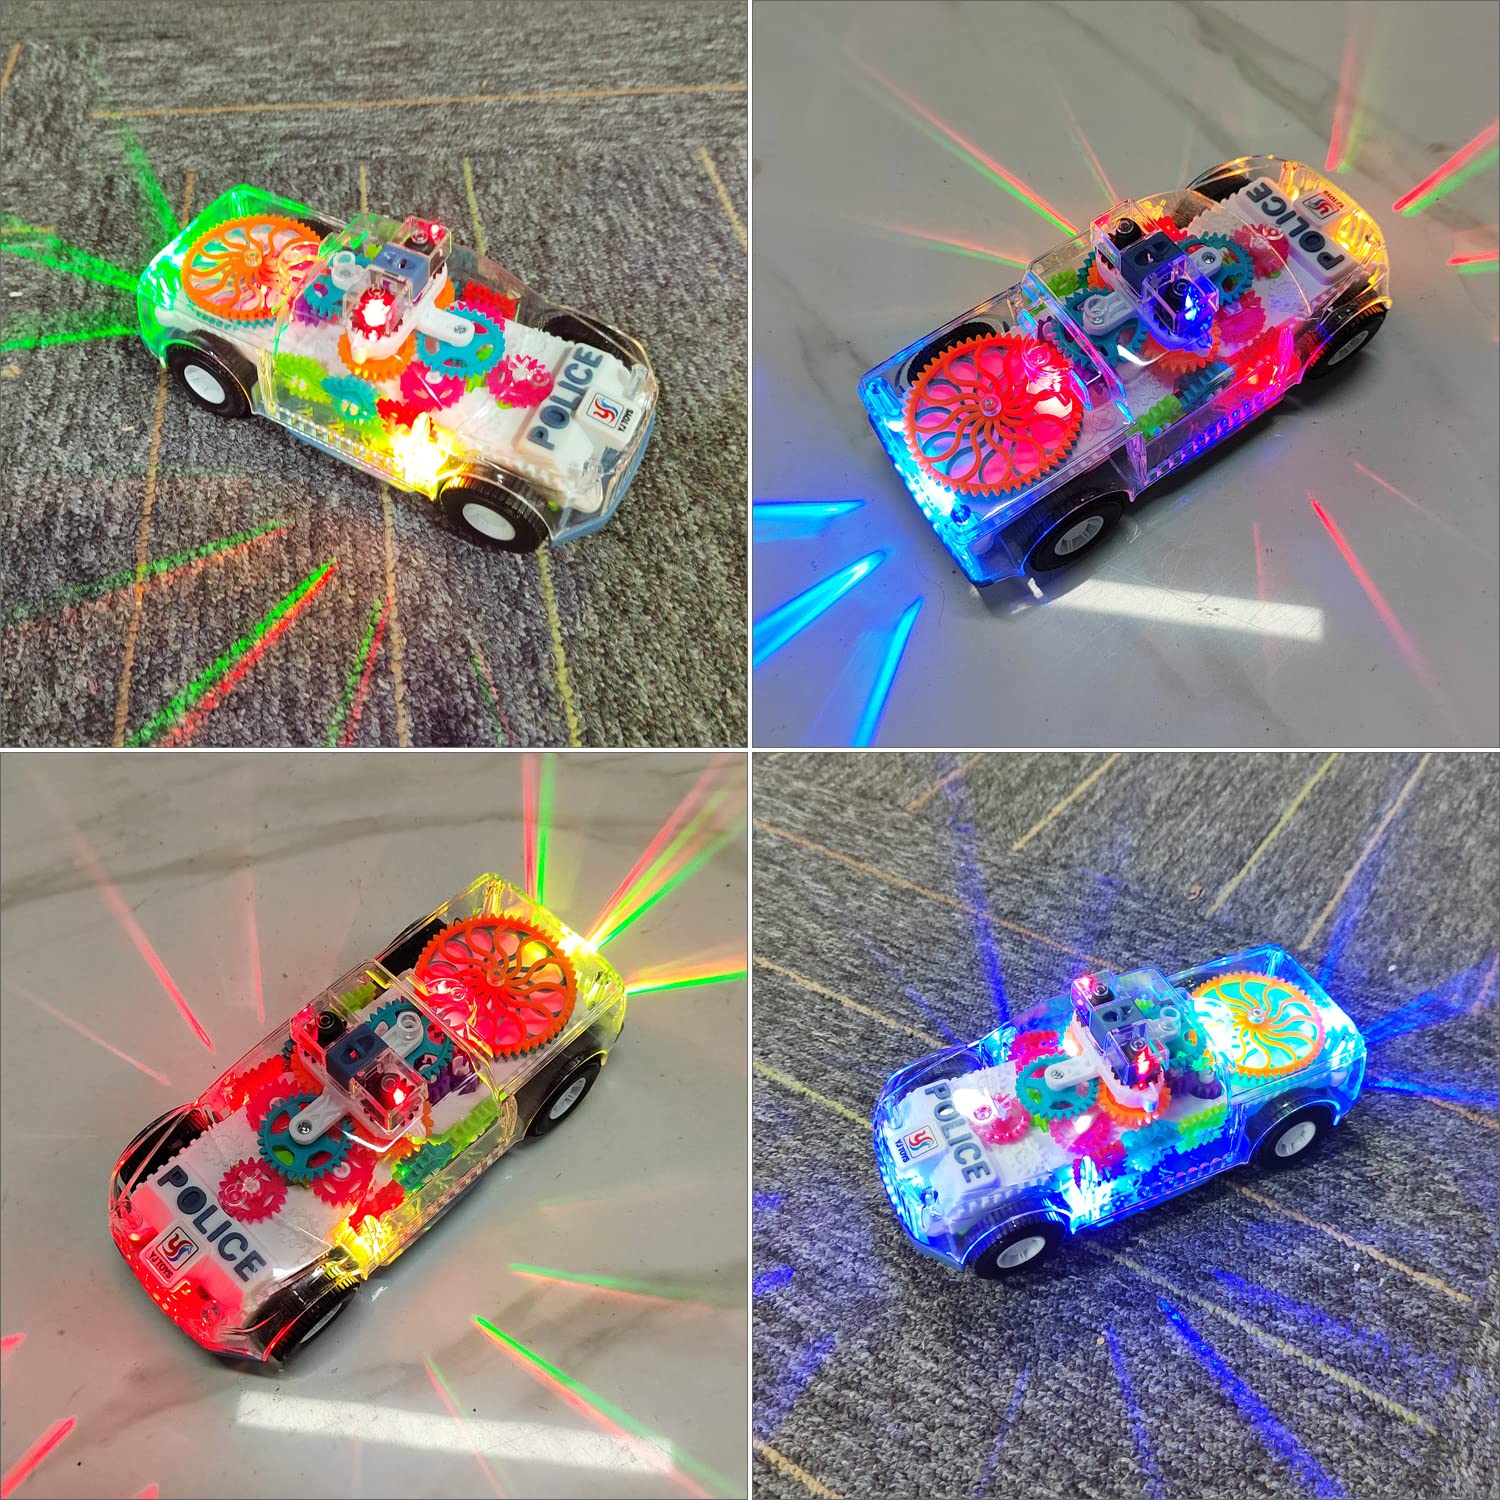 Tipmant Baby Toddler Police Car Electric Vehicle Toy Auto Driving, Transparent Gears, Music, Lights, Kids Gifts